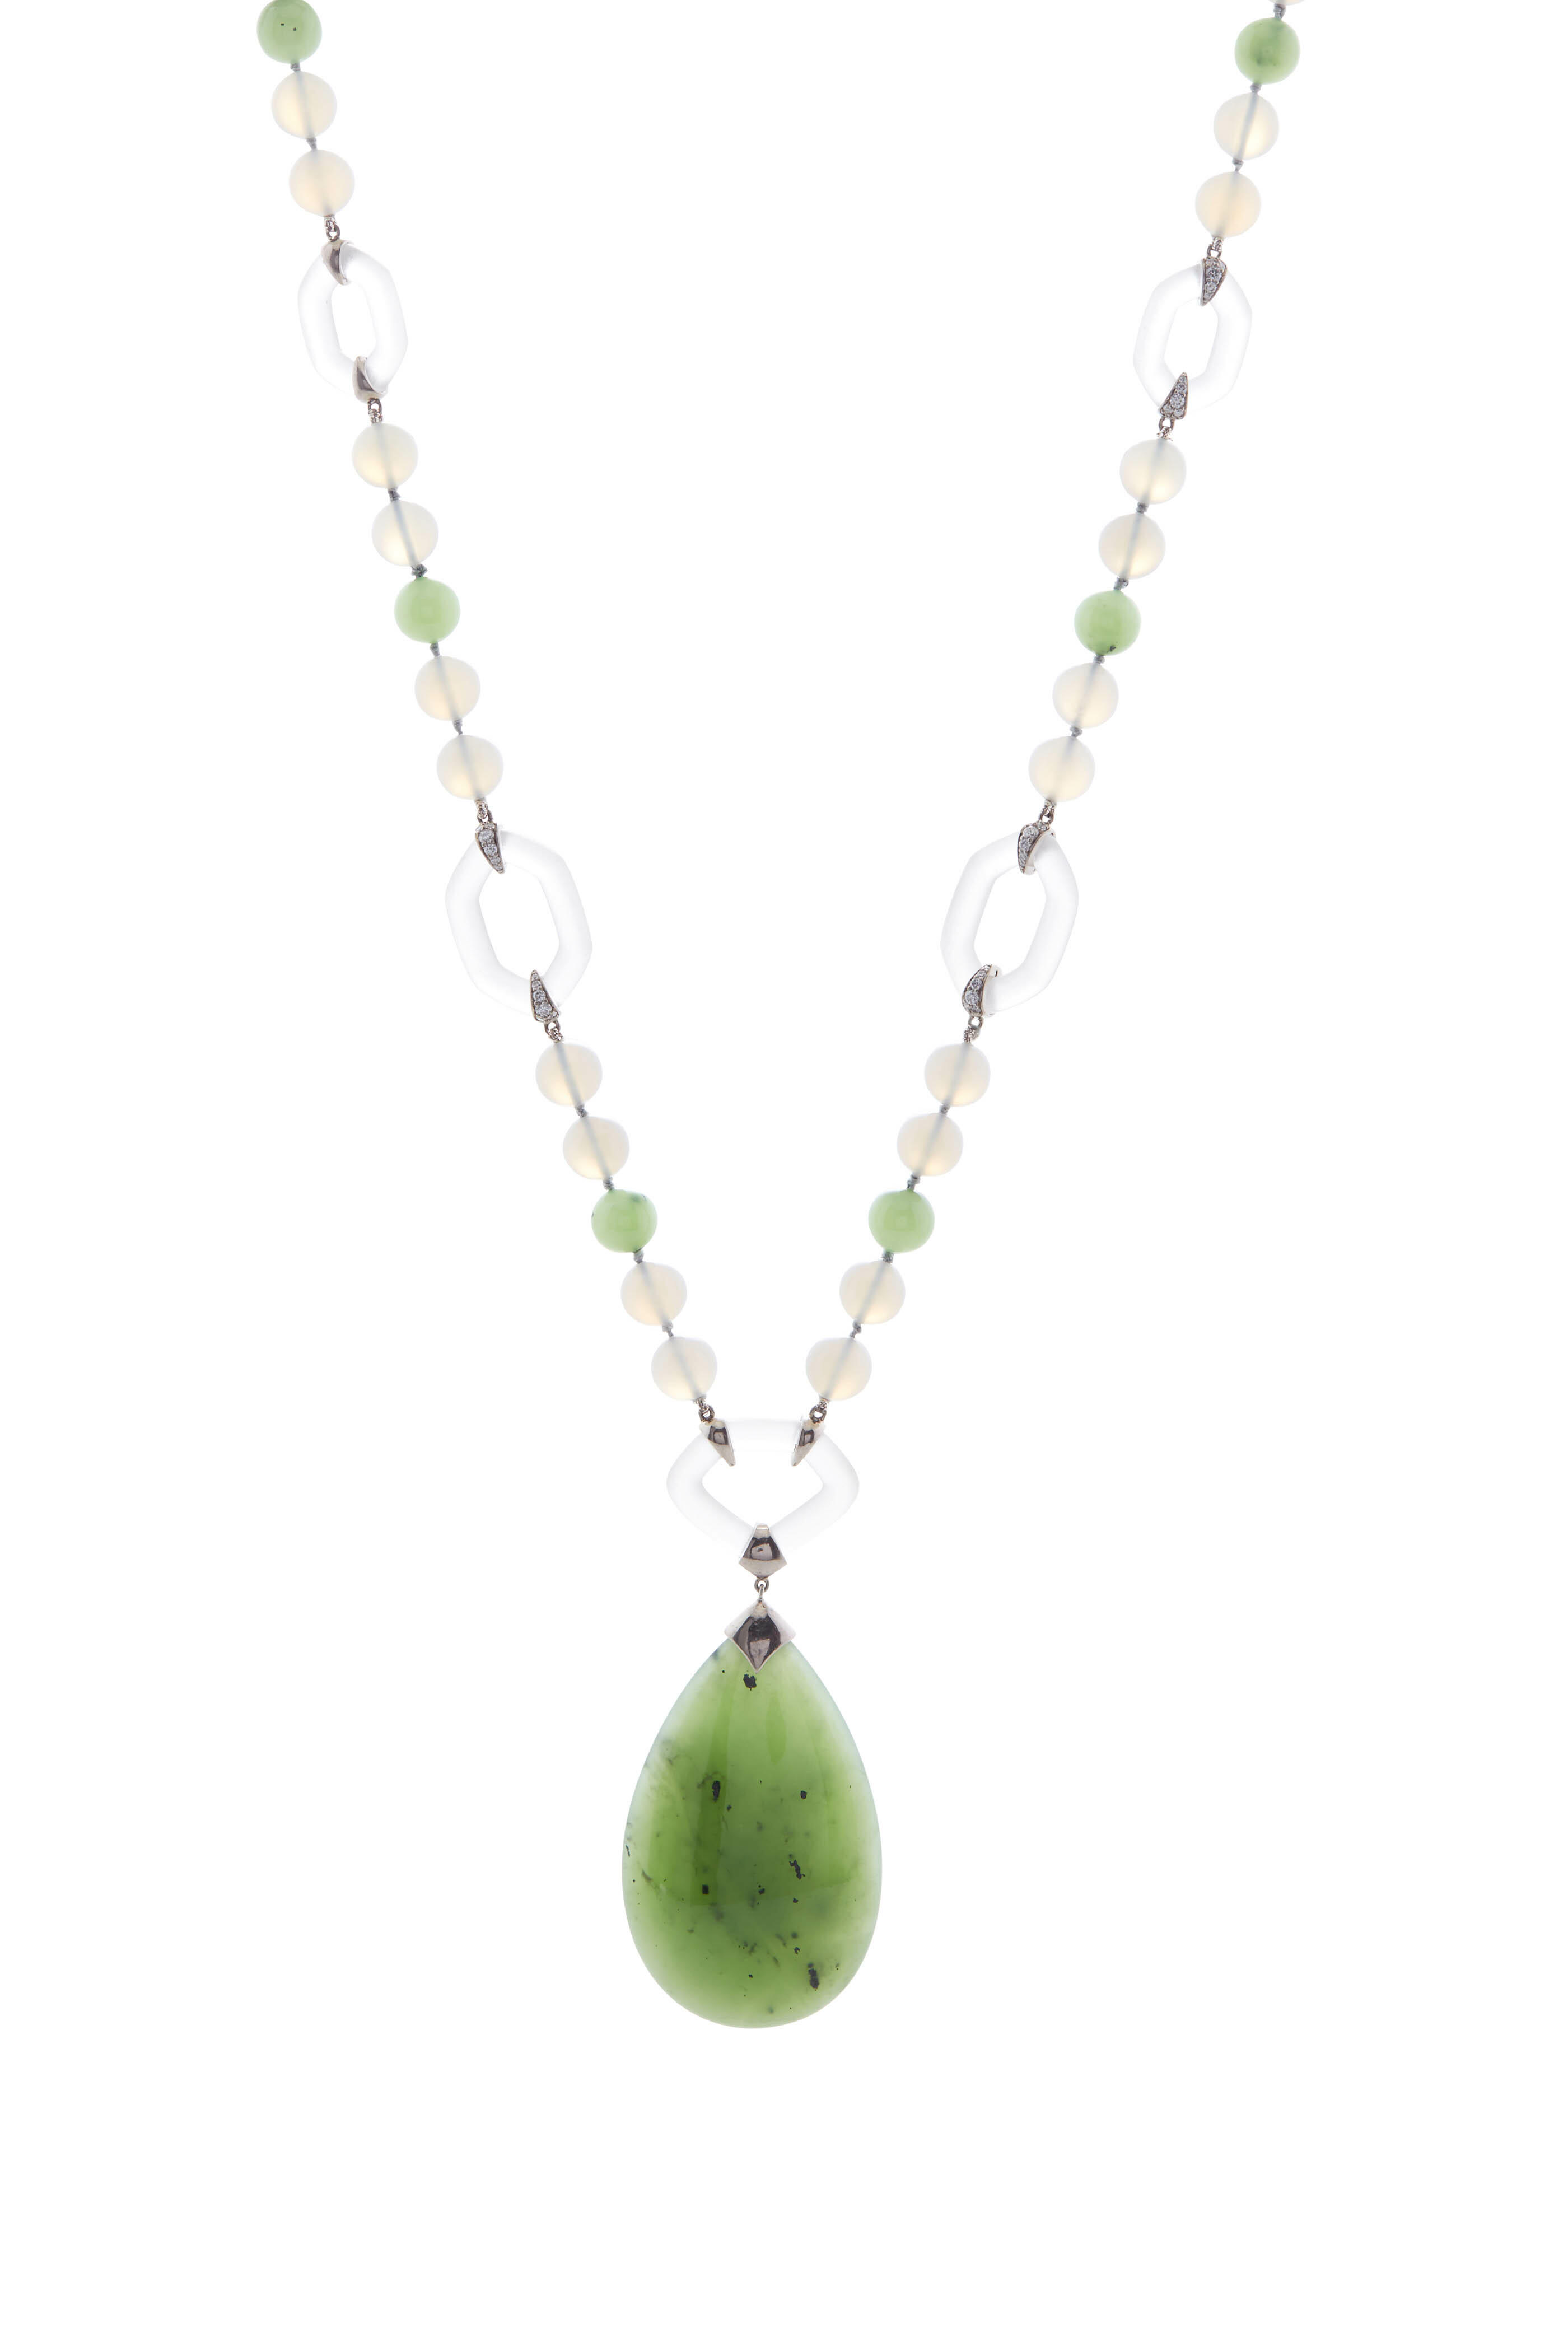 Fred Leighton - Green Nephrite & Gray Chalcedony Necklace